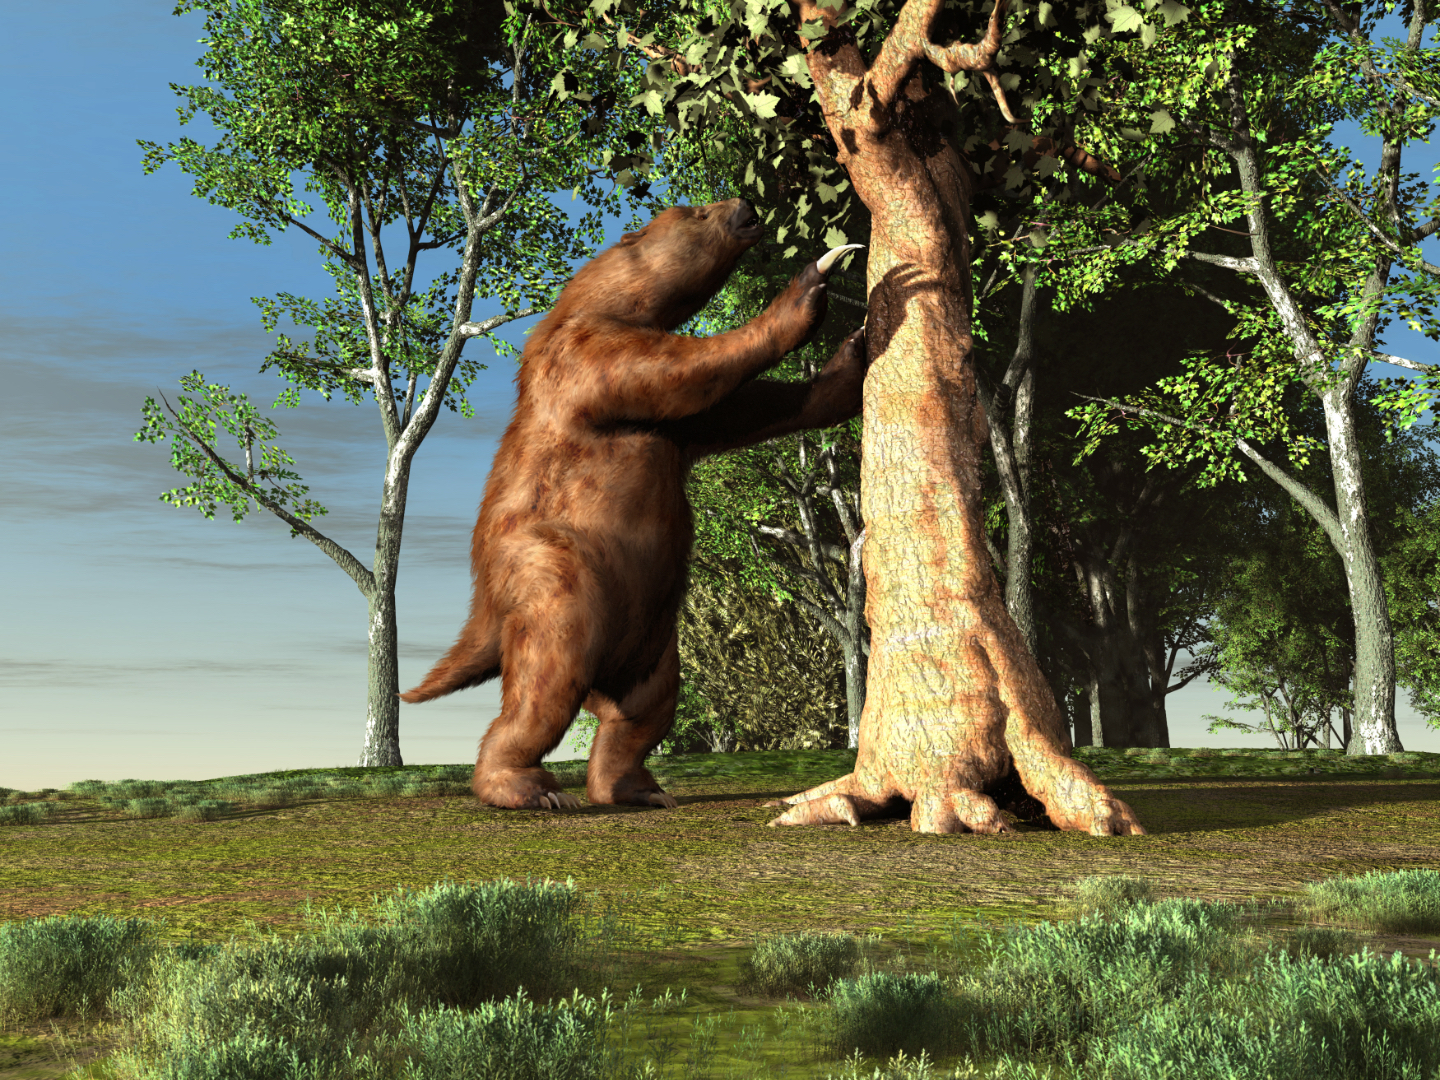 Long assumed to be devoted vegetarians, ancient sloths were fine with some meat.